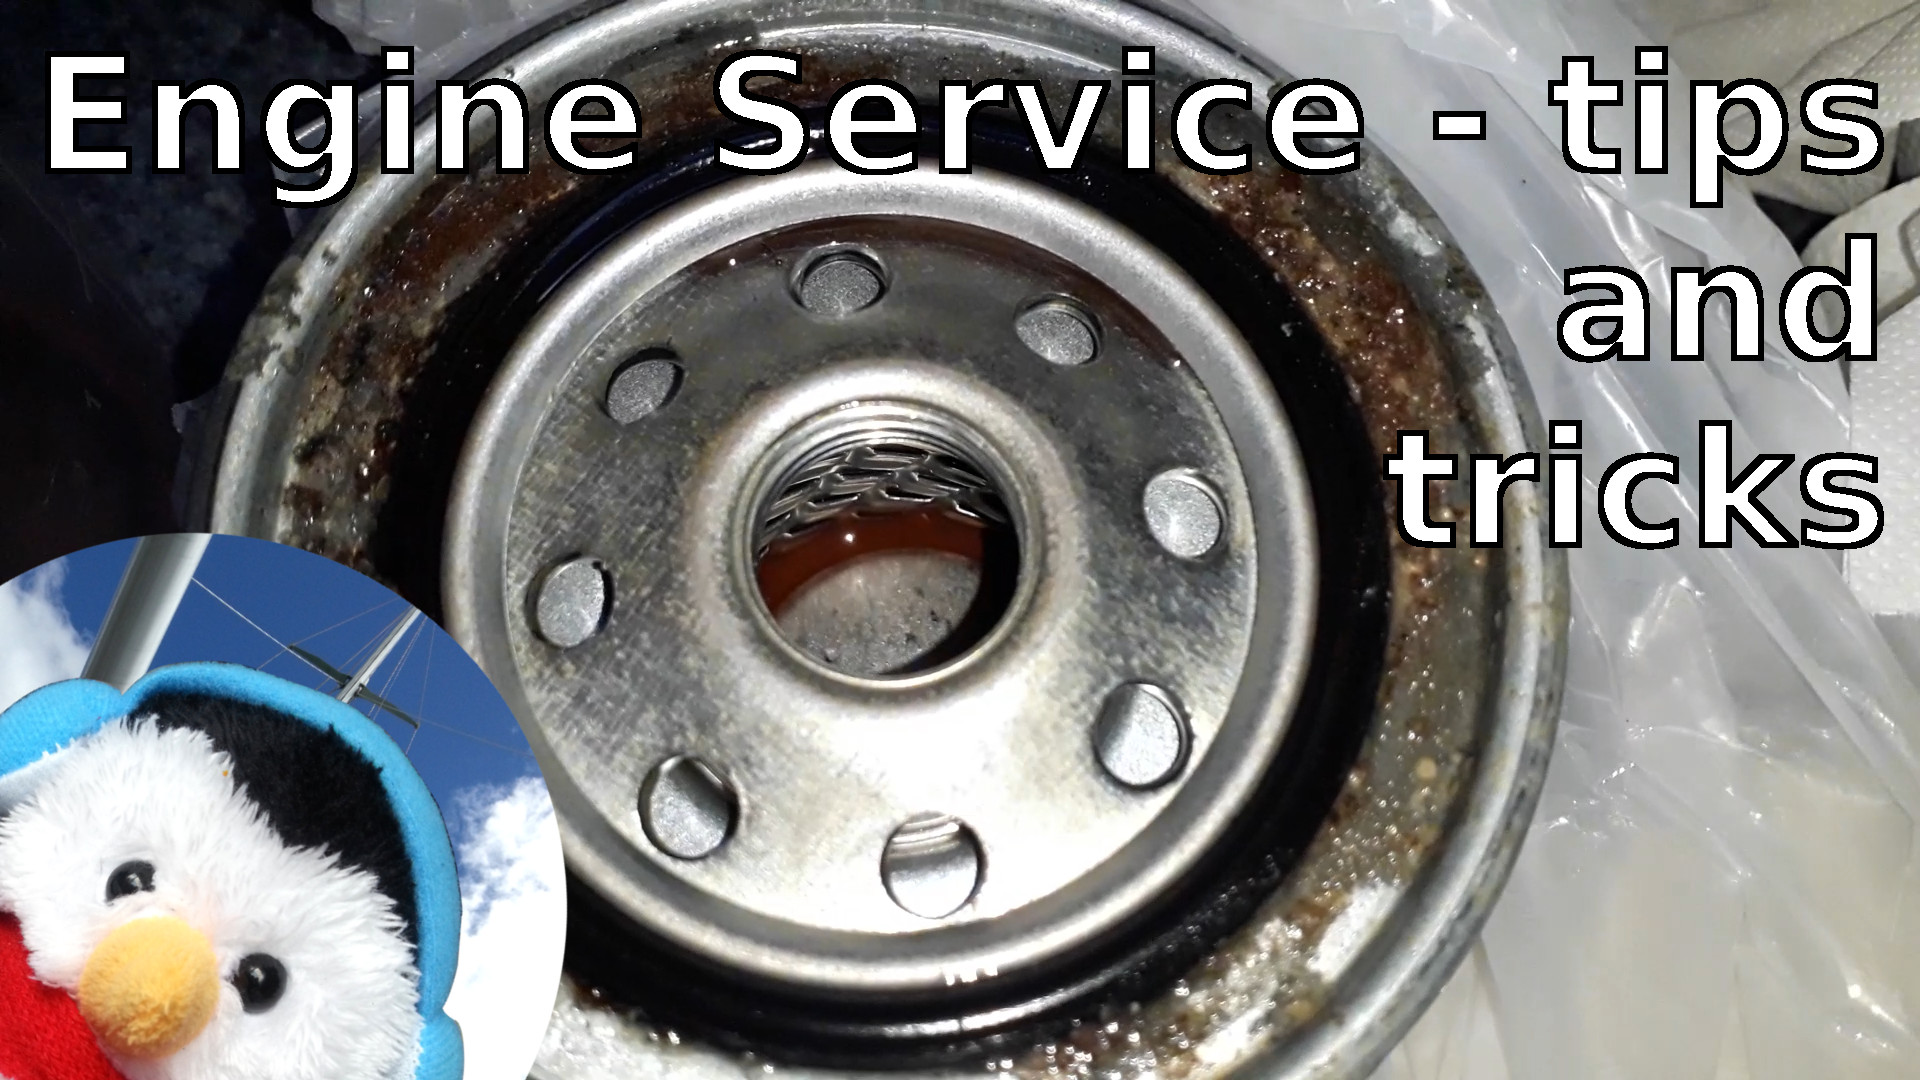 Watch our "Engine Service - Tips and tricks" video and add comments